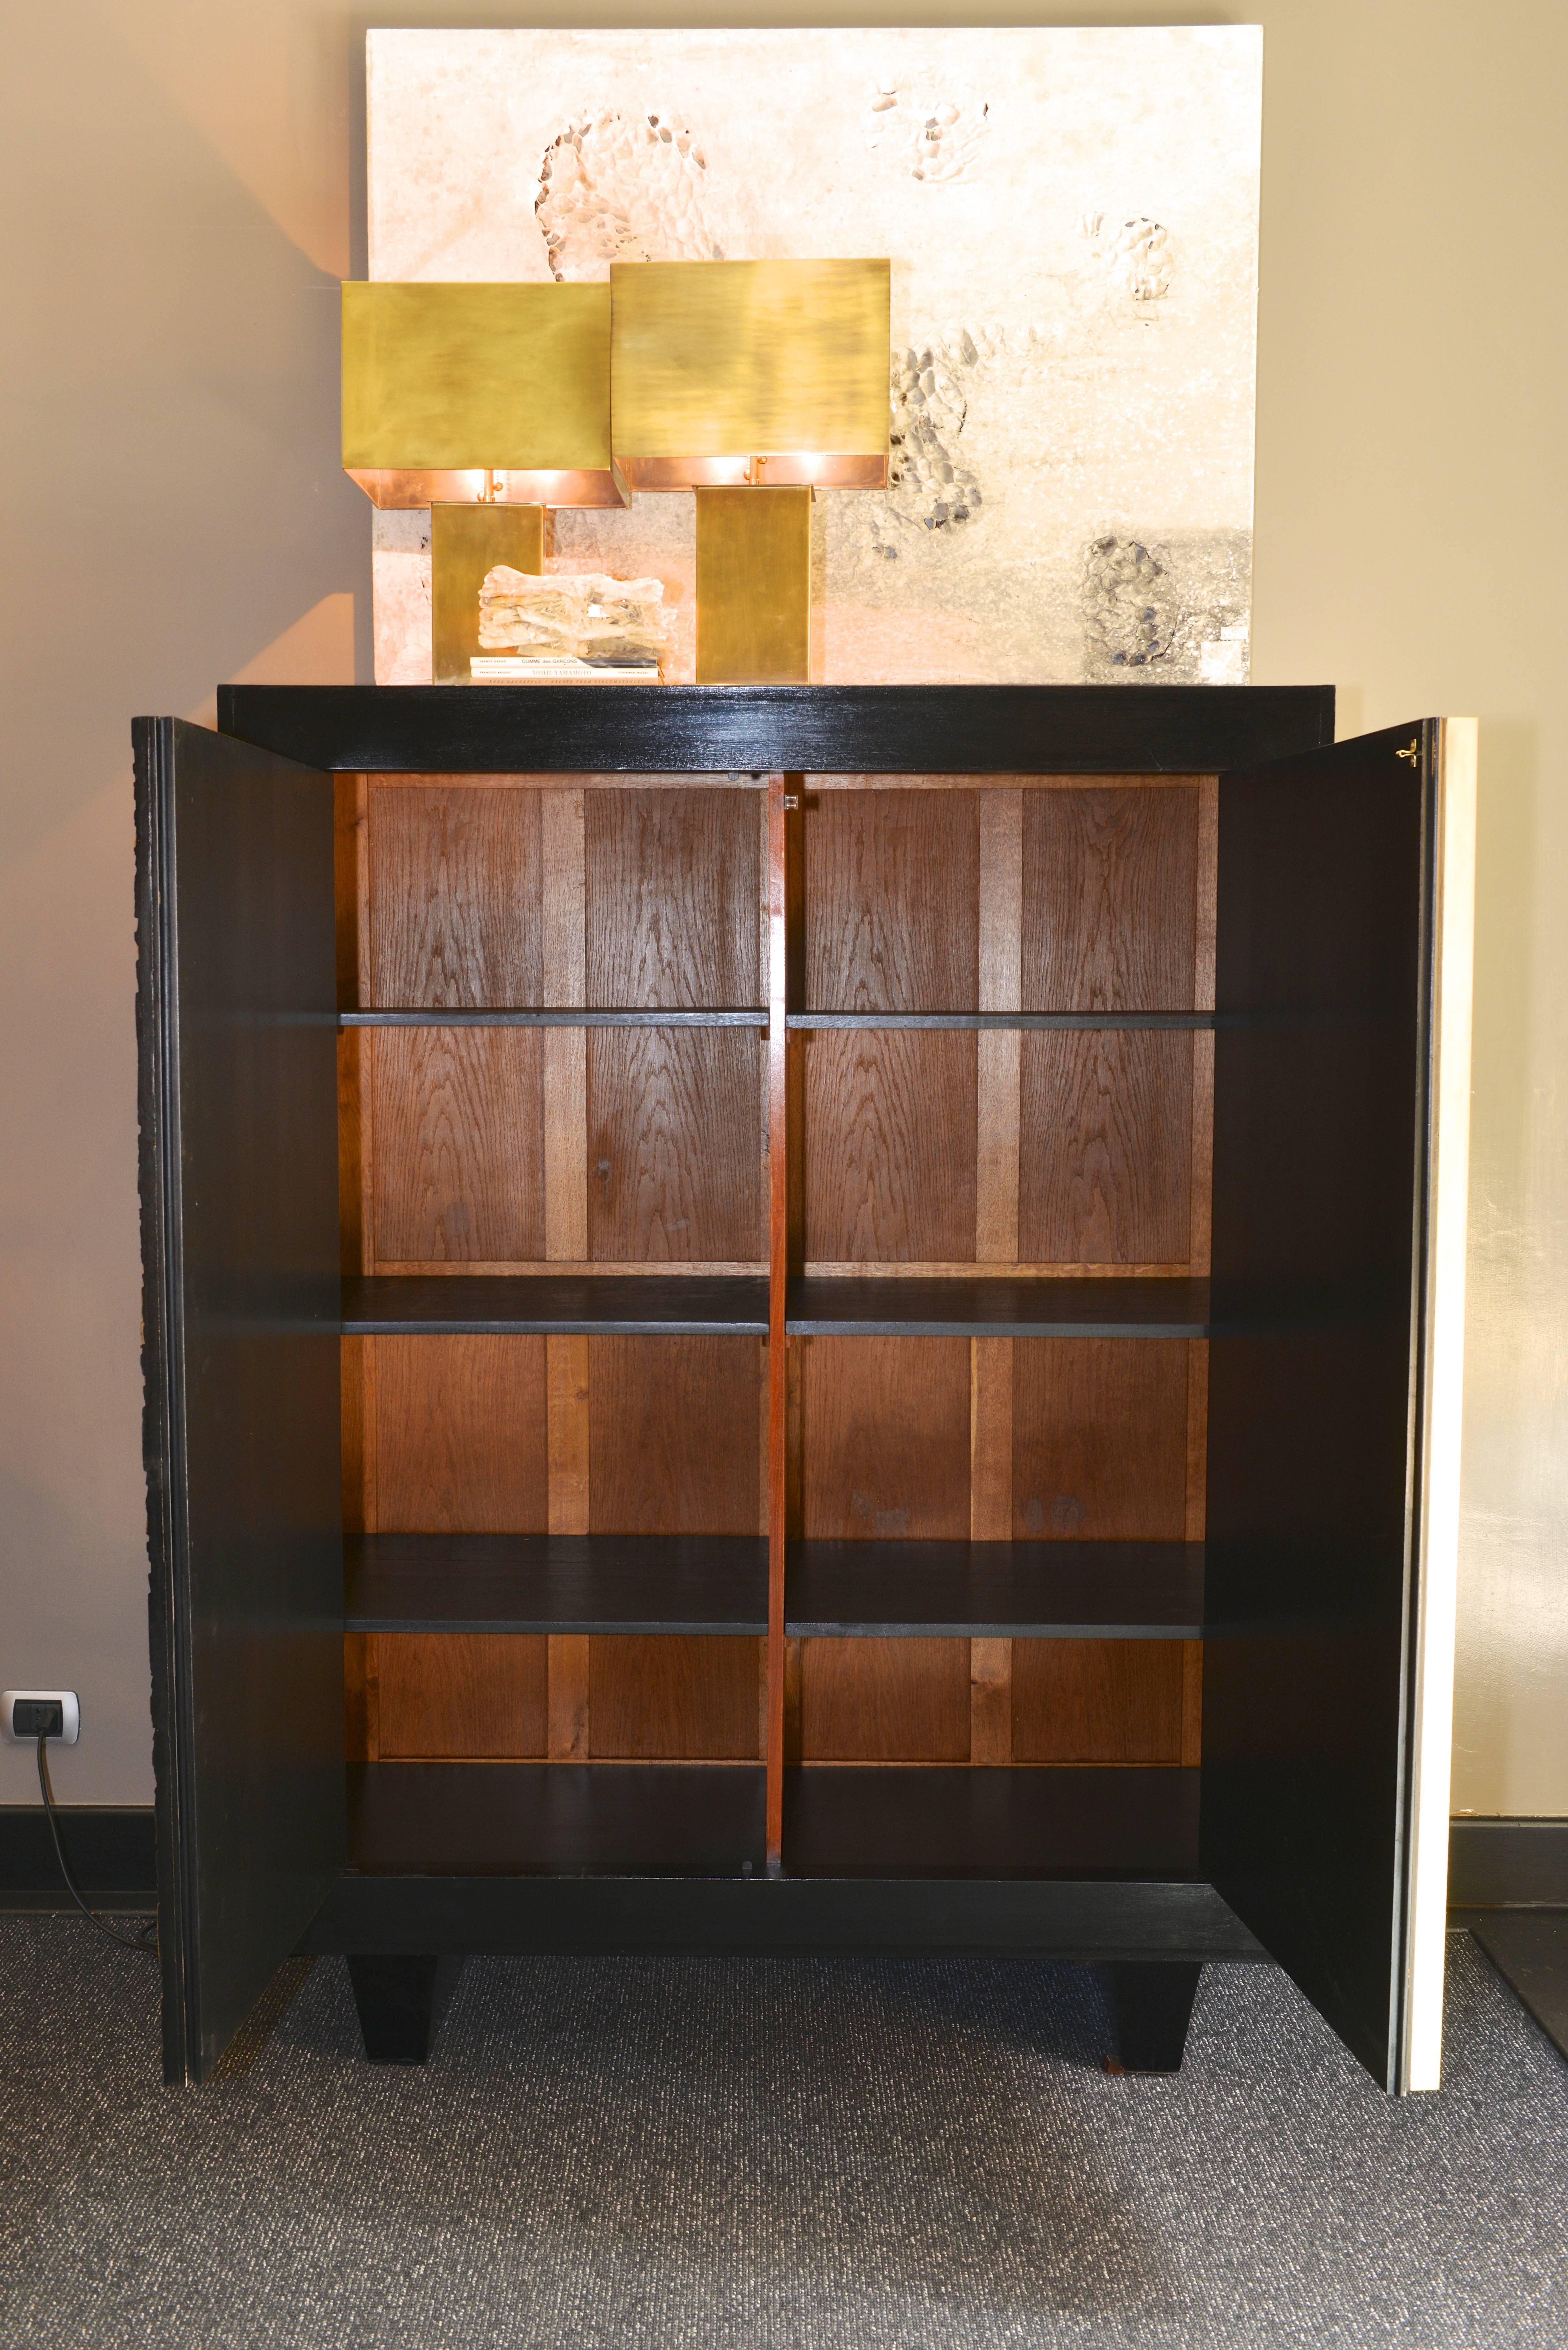 Mid-Century Modern Italian Highboard of the 1950s in Ebonized Wood with Sculptural Doors in Resin